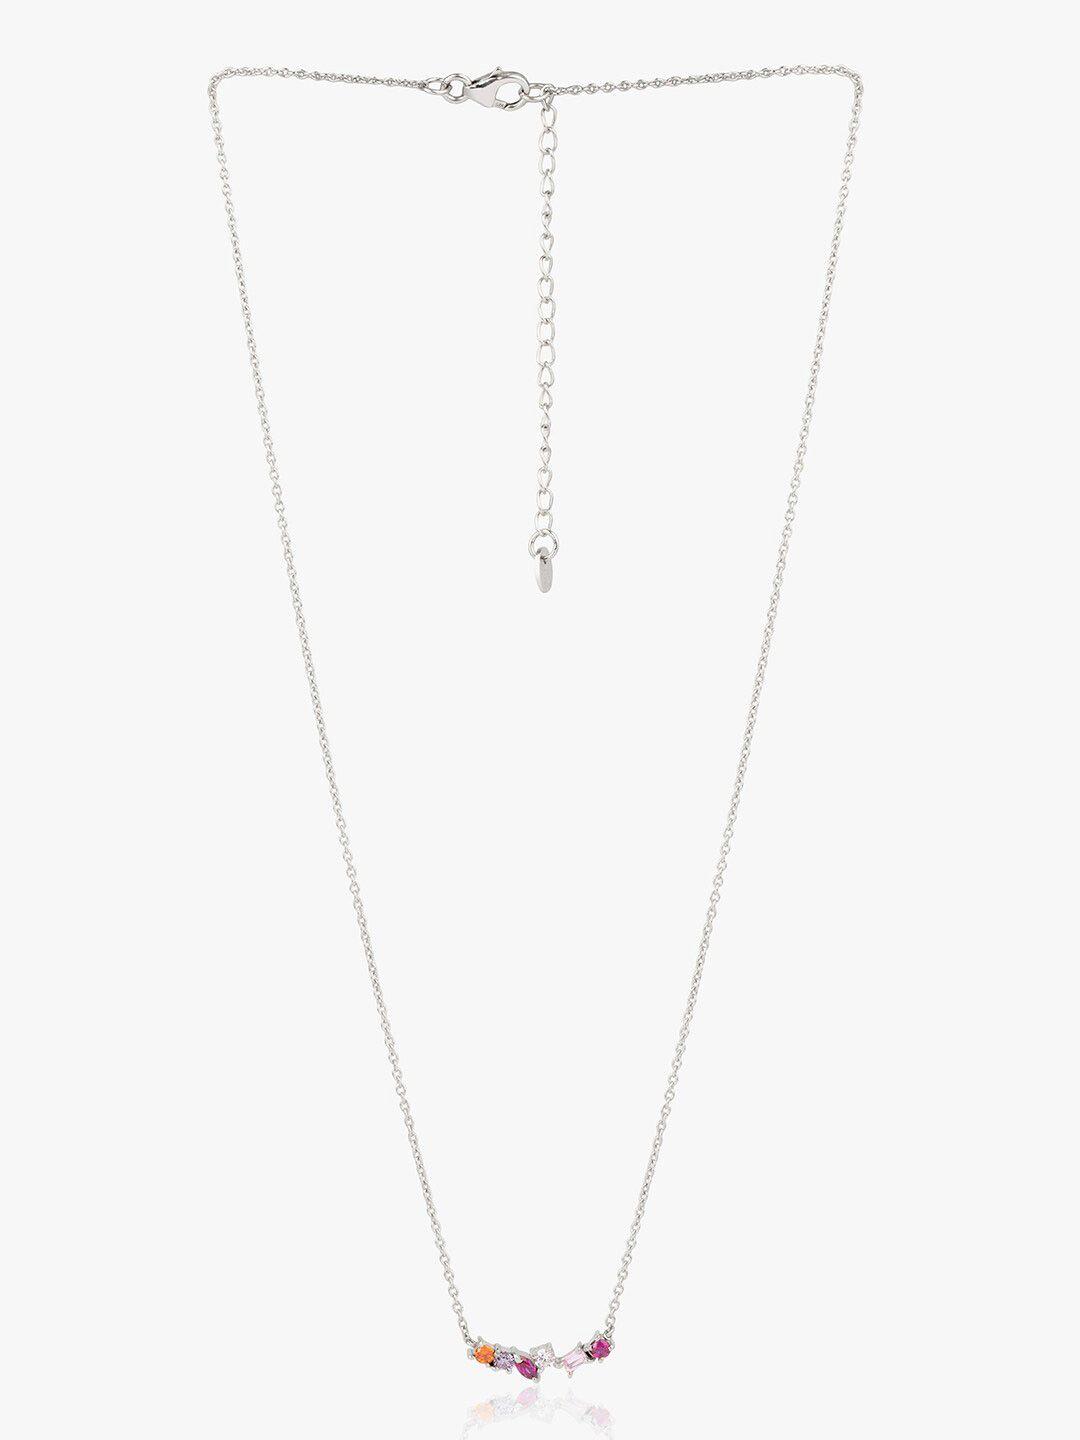 mikoto by fablestreet sterling silver rhodium-plated necklace